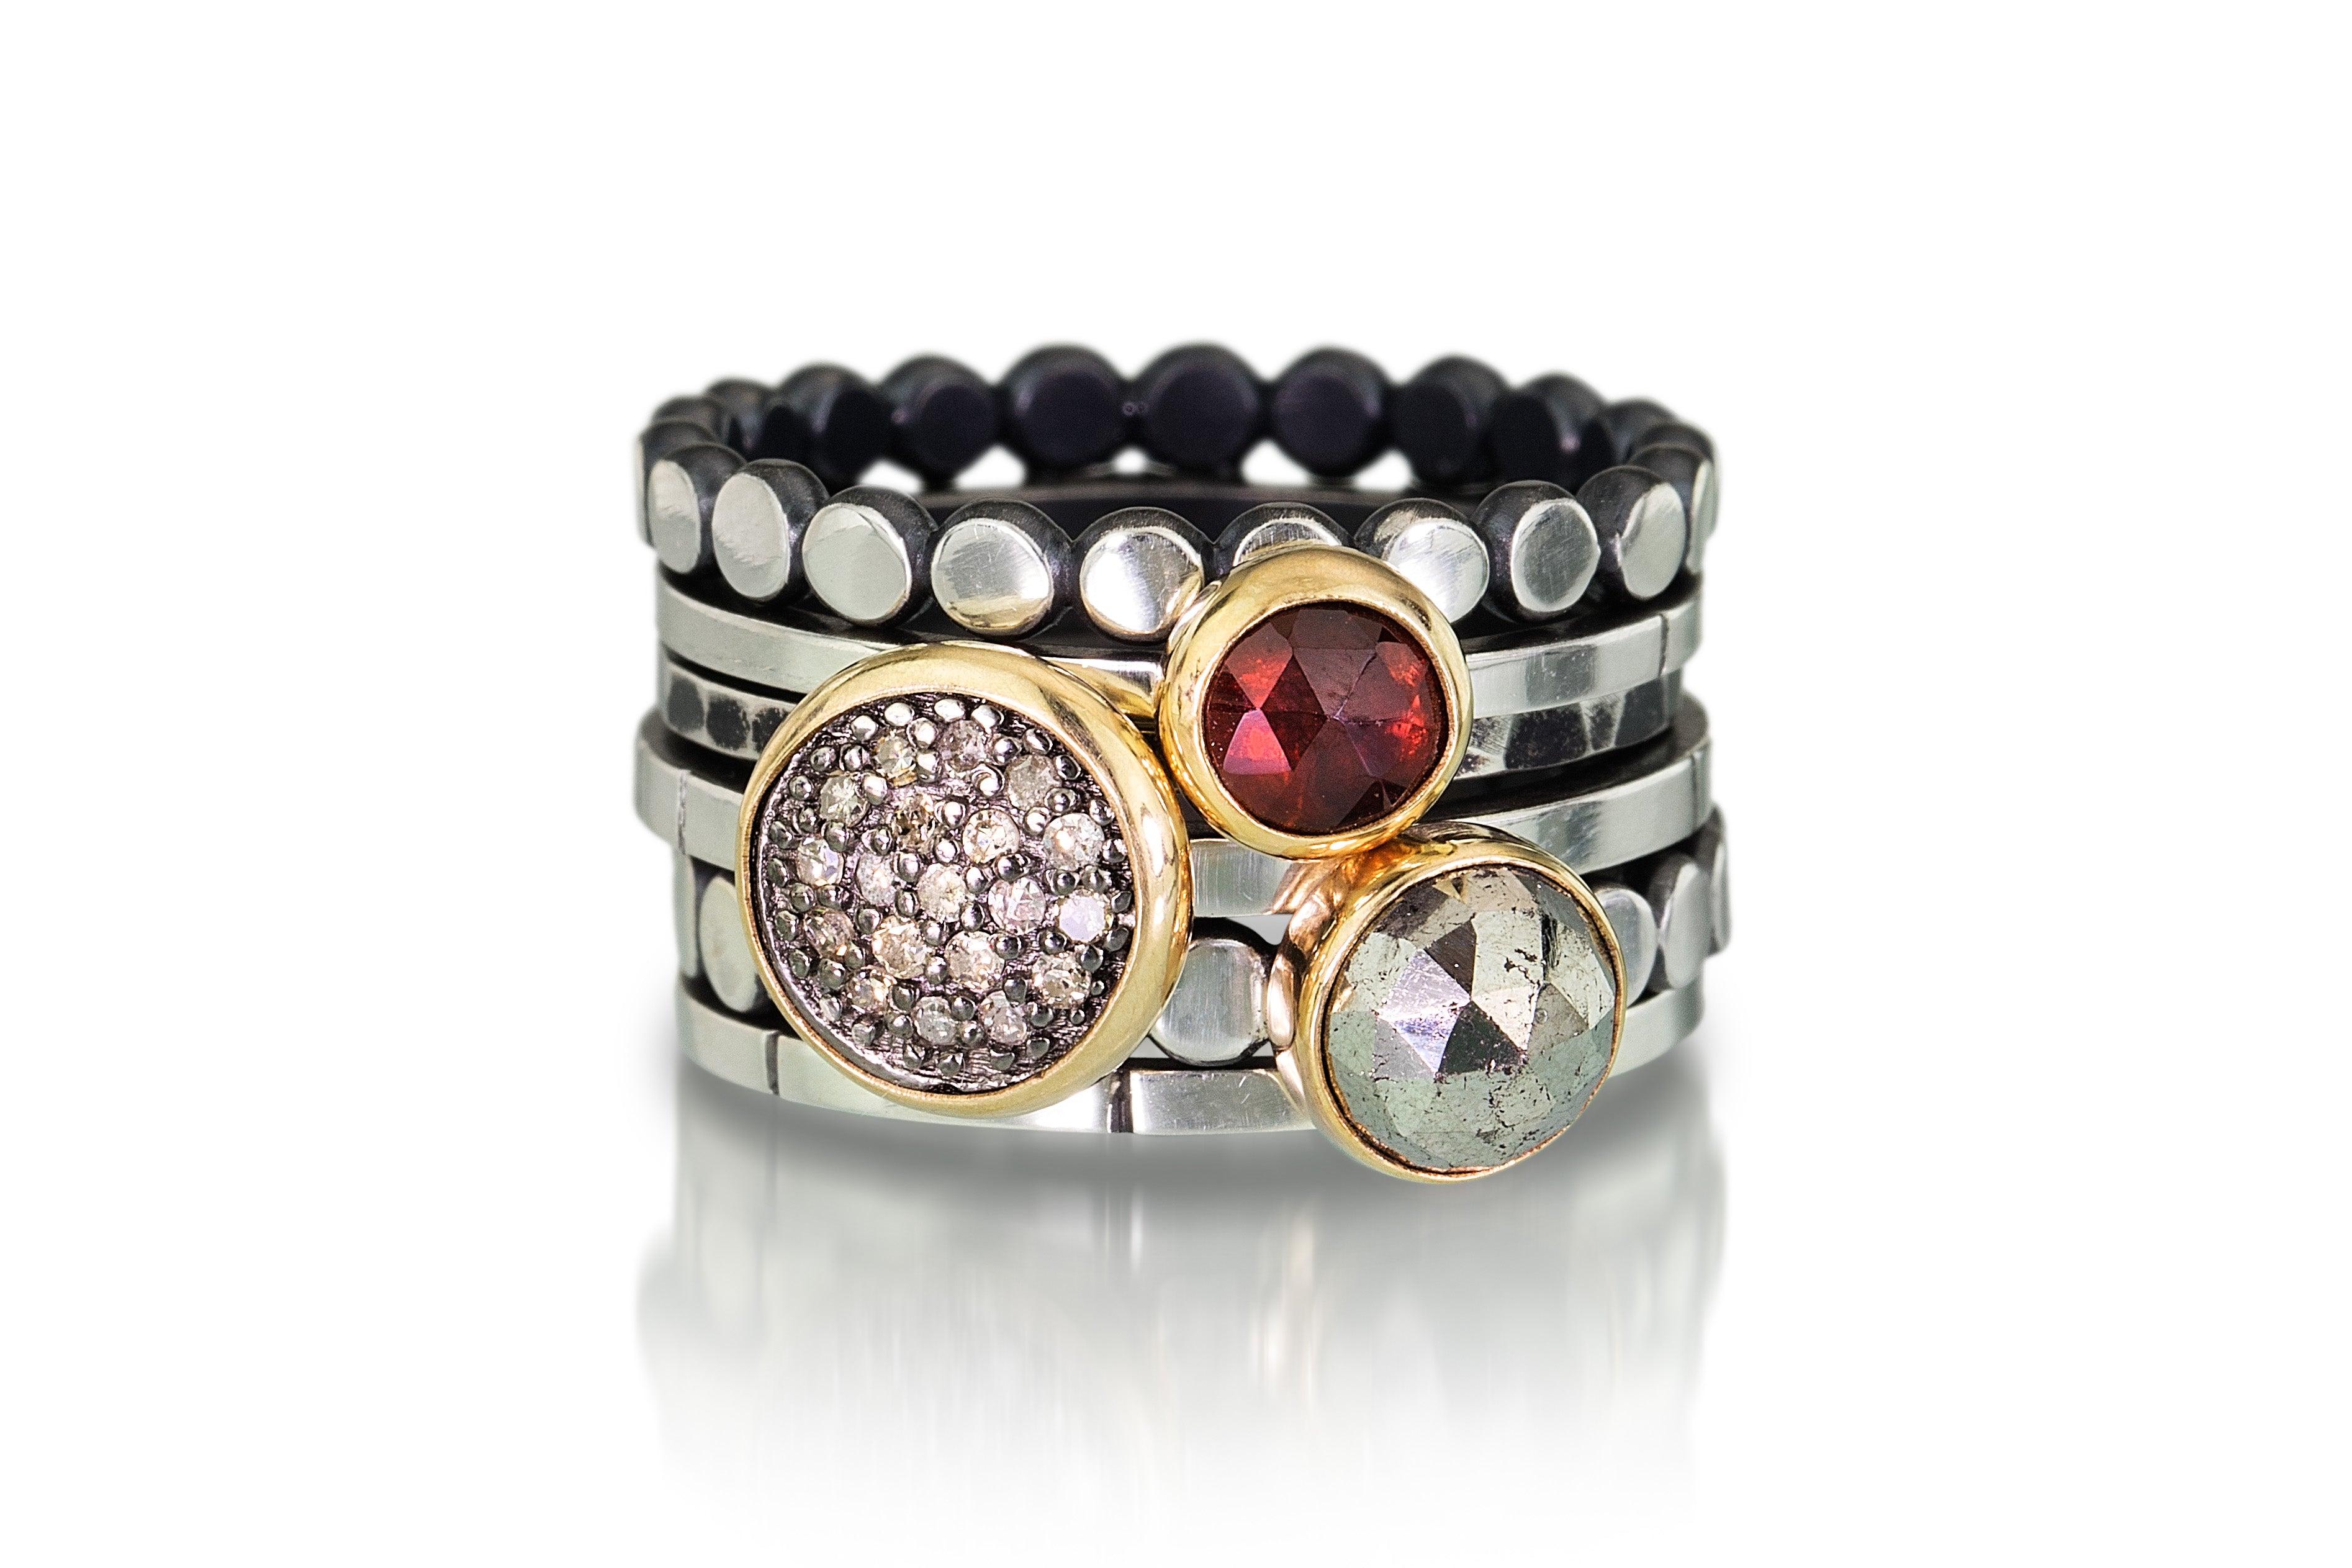 pave diamond stacking rings - 14k bezels 8mm pave, pyrite and garnet